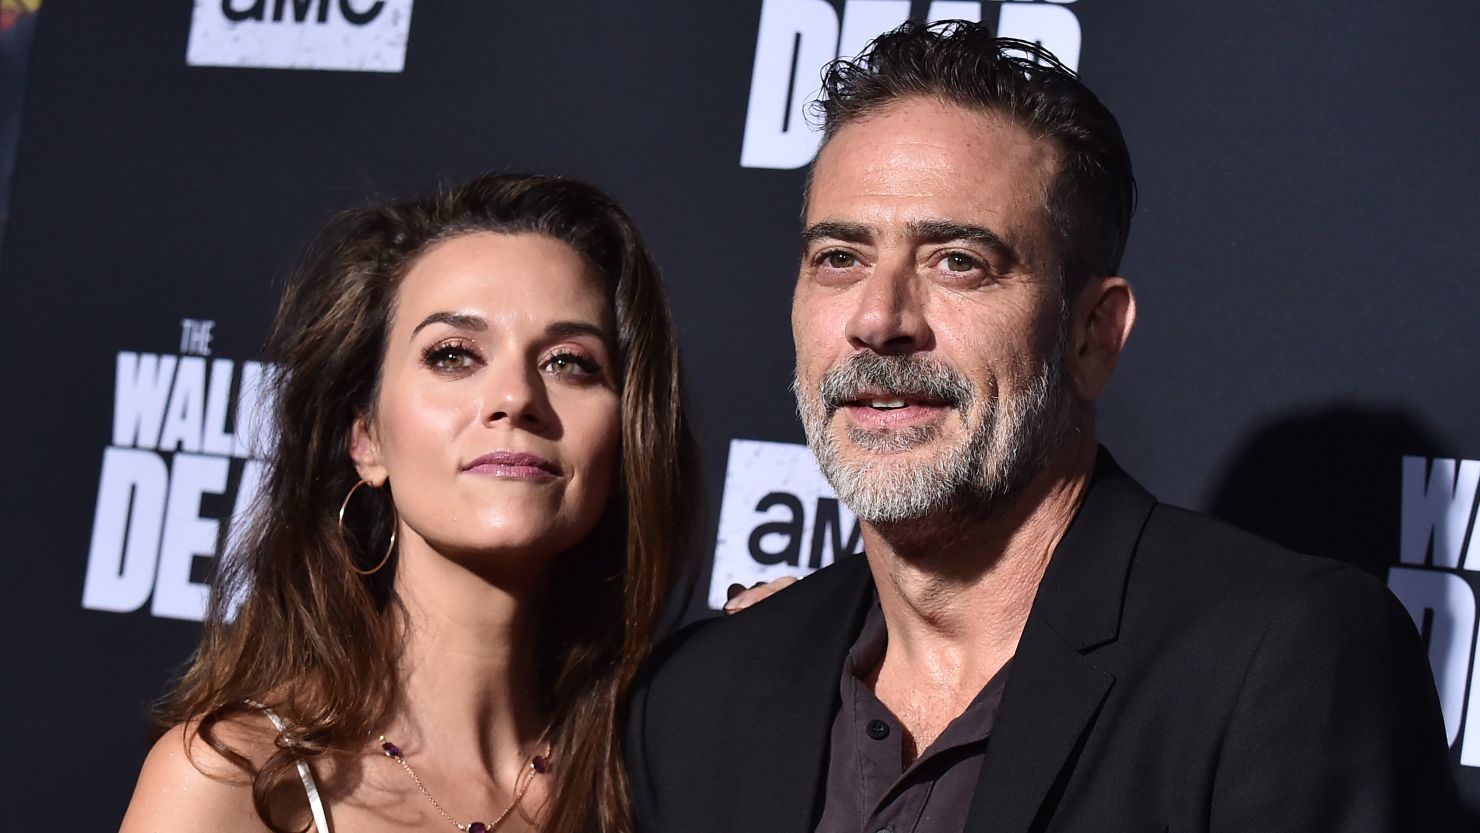 Jeffrey Dean Morgan and Hilarie Burton attend the Season 10 Premiere of 'The Walking Dead' at Chinese Theatre in Hollywood, California, on September 23, 2019.